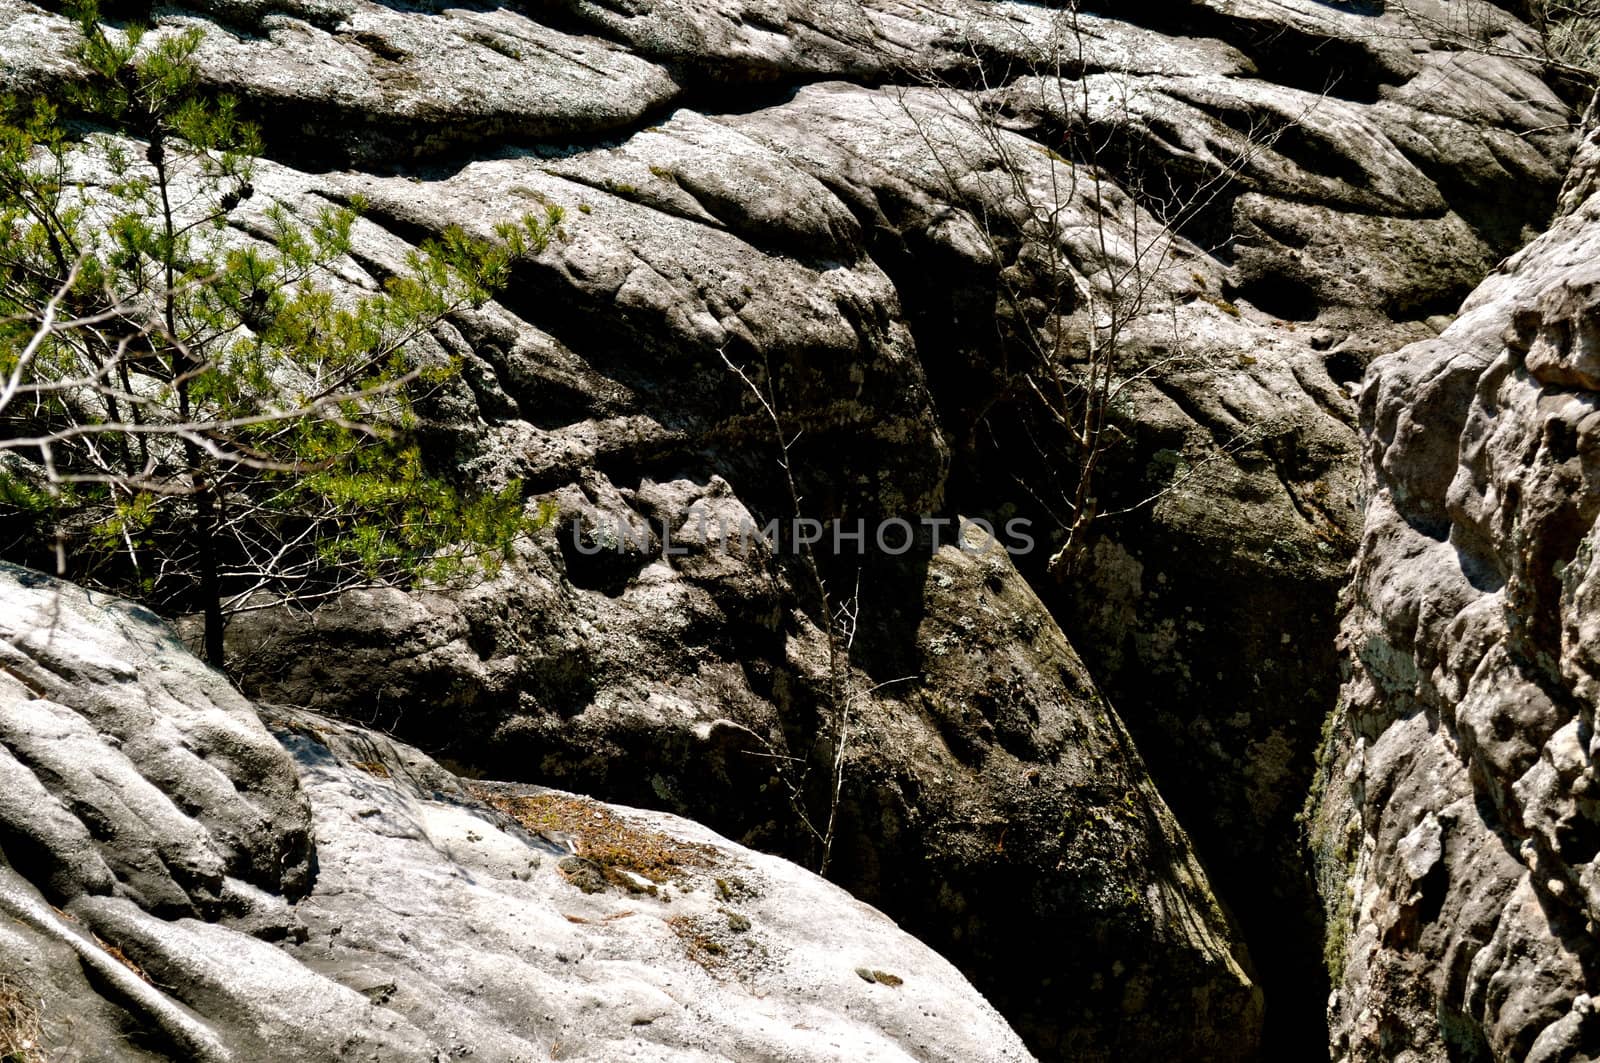 Boulders and Branches
